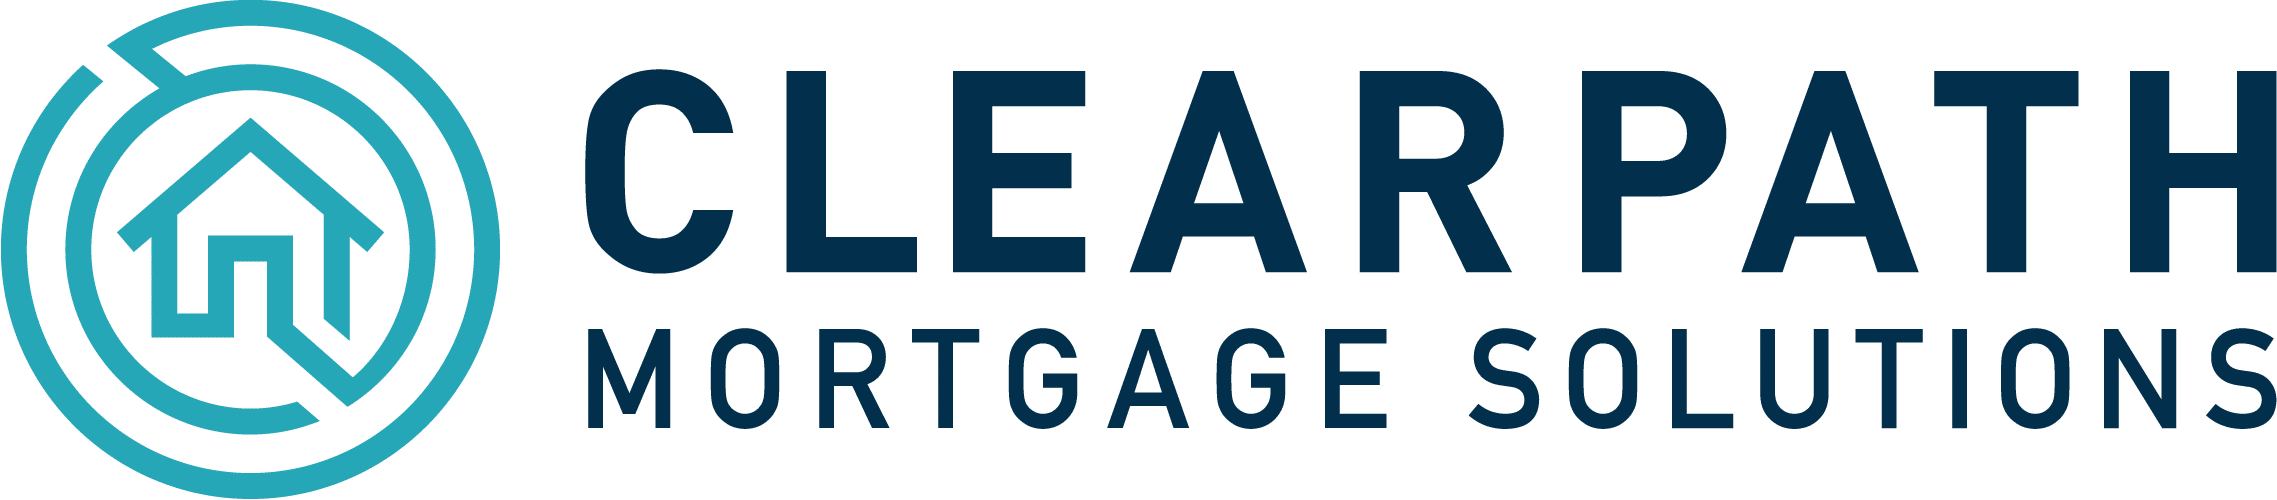 Mortgage Brokers In Albany, NY | ClearPath Mortgage Solutions